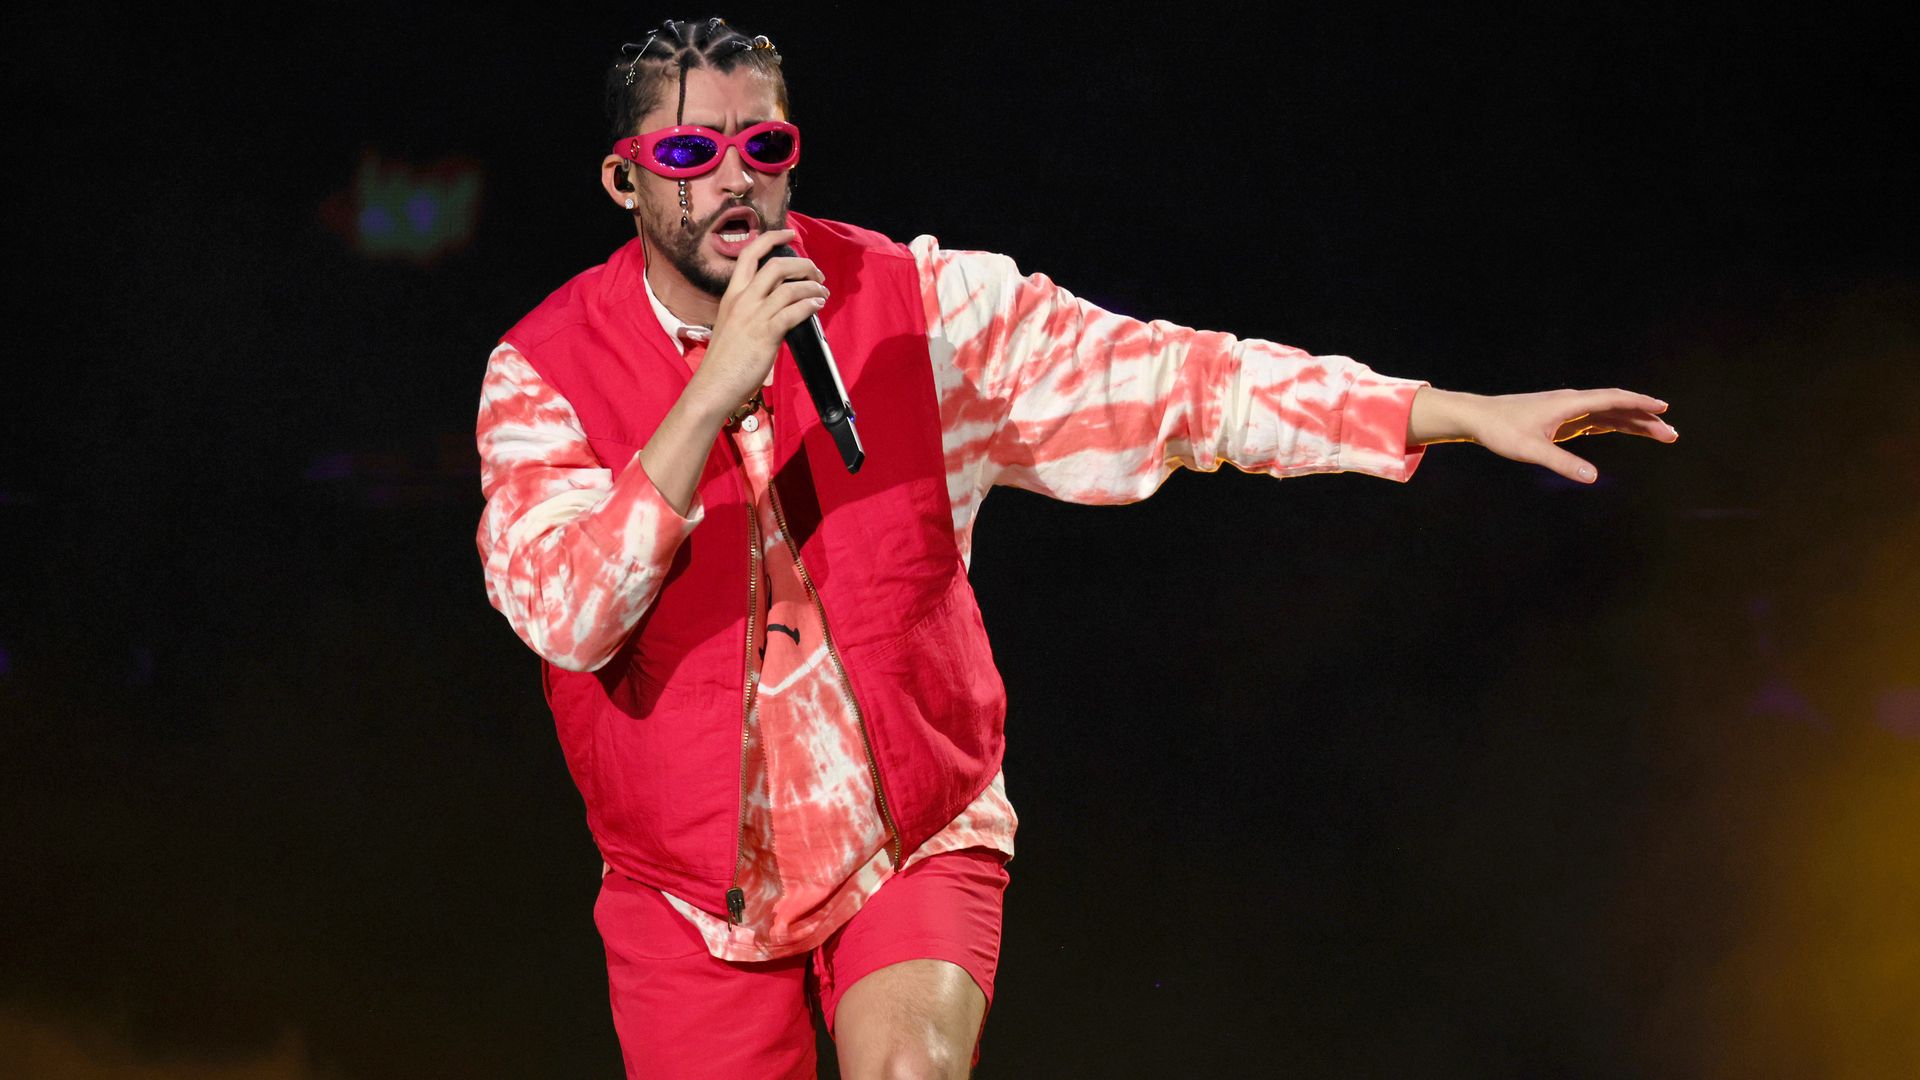 Bad Bunny wears a red outfit and red sunglasses while singing onstage 